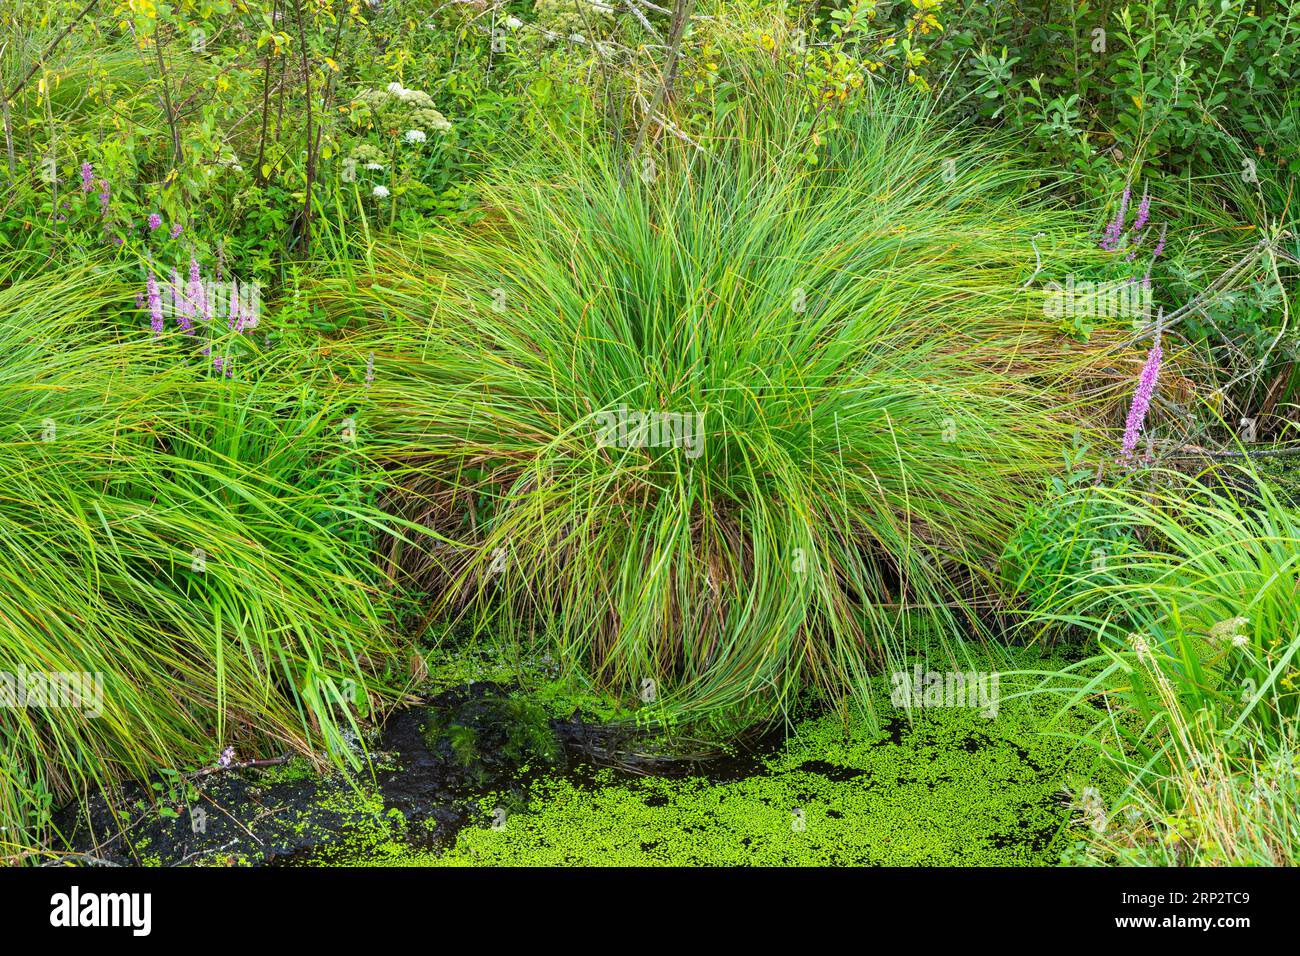 Greater tussock sedge (Carex paniculata), sour grass family (Poaceae), water ditch, Pfrunger-Burgweiler Ried, Baden-Wuerttemberg, Germany Stock Photo